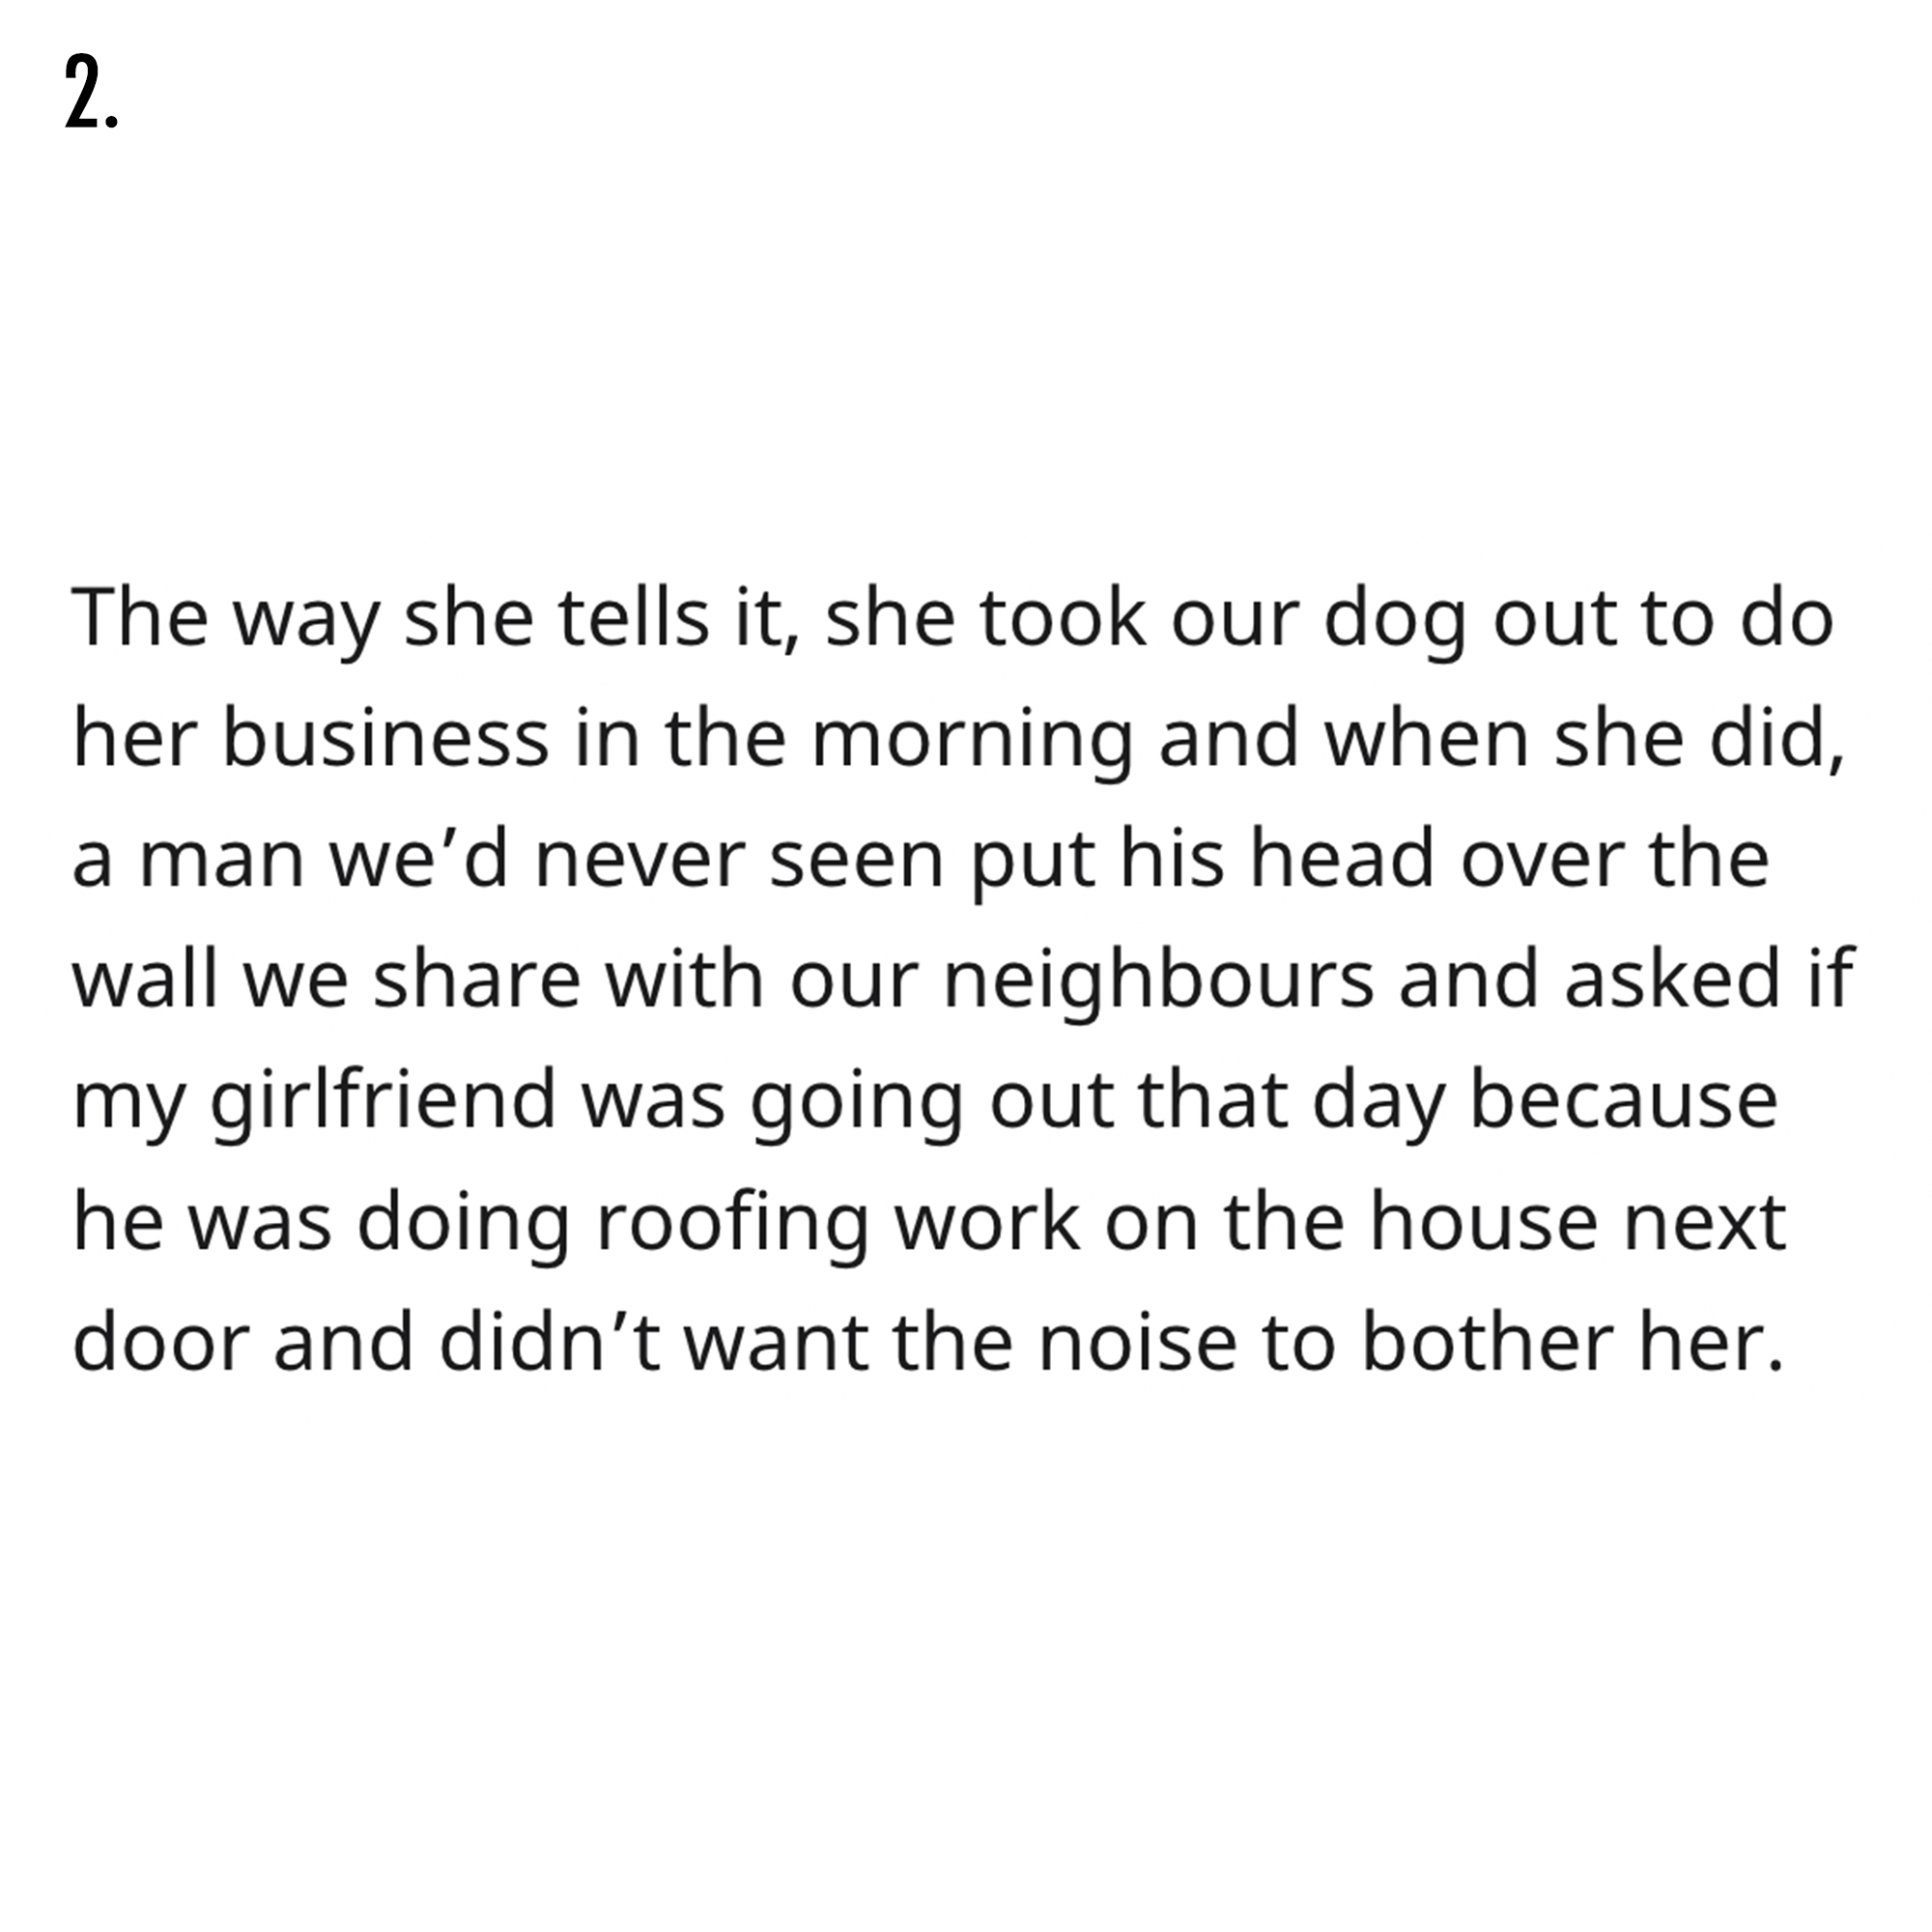 AITA Reddit Story - peer pressure quotes - 2. The way she tells it, she took our dog out to do her business in the morning and when she did, a man we'd never seen put his head over the wall we with our neighbours and asked if my girlfriend was going out t